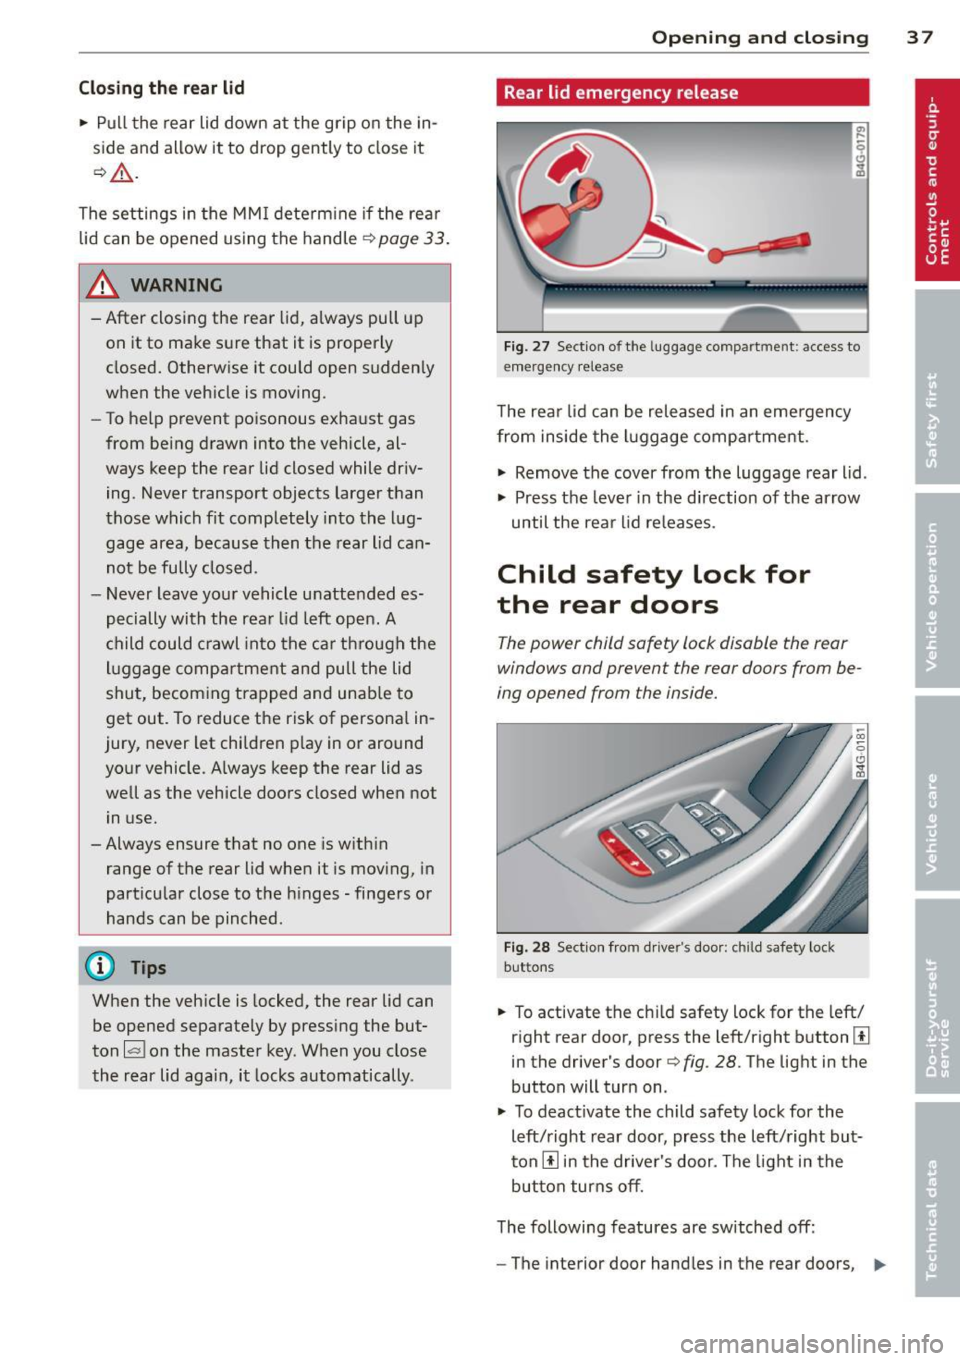 AUDI S6 2012 Owners Guide Clos ing  th e re ar lid 
•  Pull the  rear  lid  down  at  the  grip  on  the  in­
s ide  and  allow  it to  drop  gently  to  close  it 
¢ A . 
The  settings  in the  MM I determ ine  if the  re